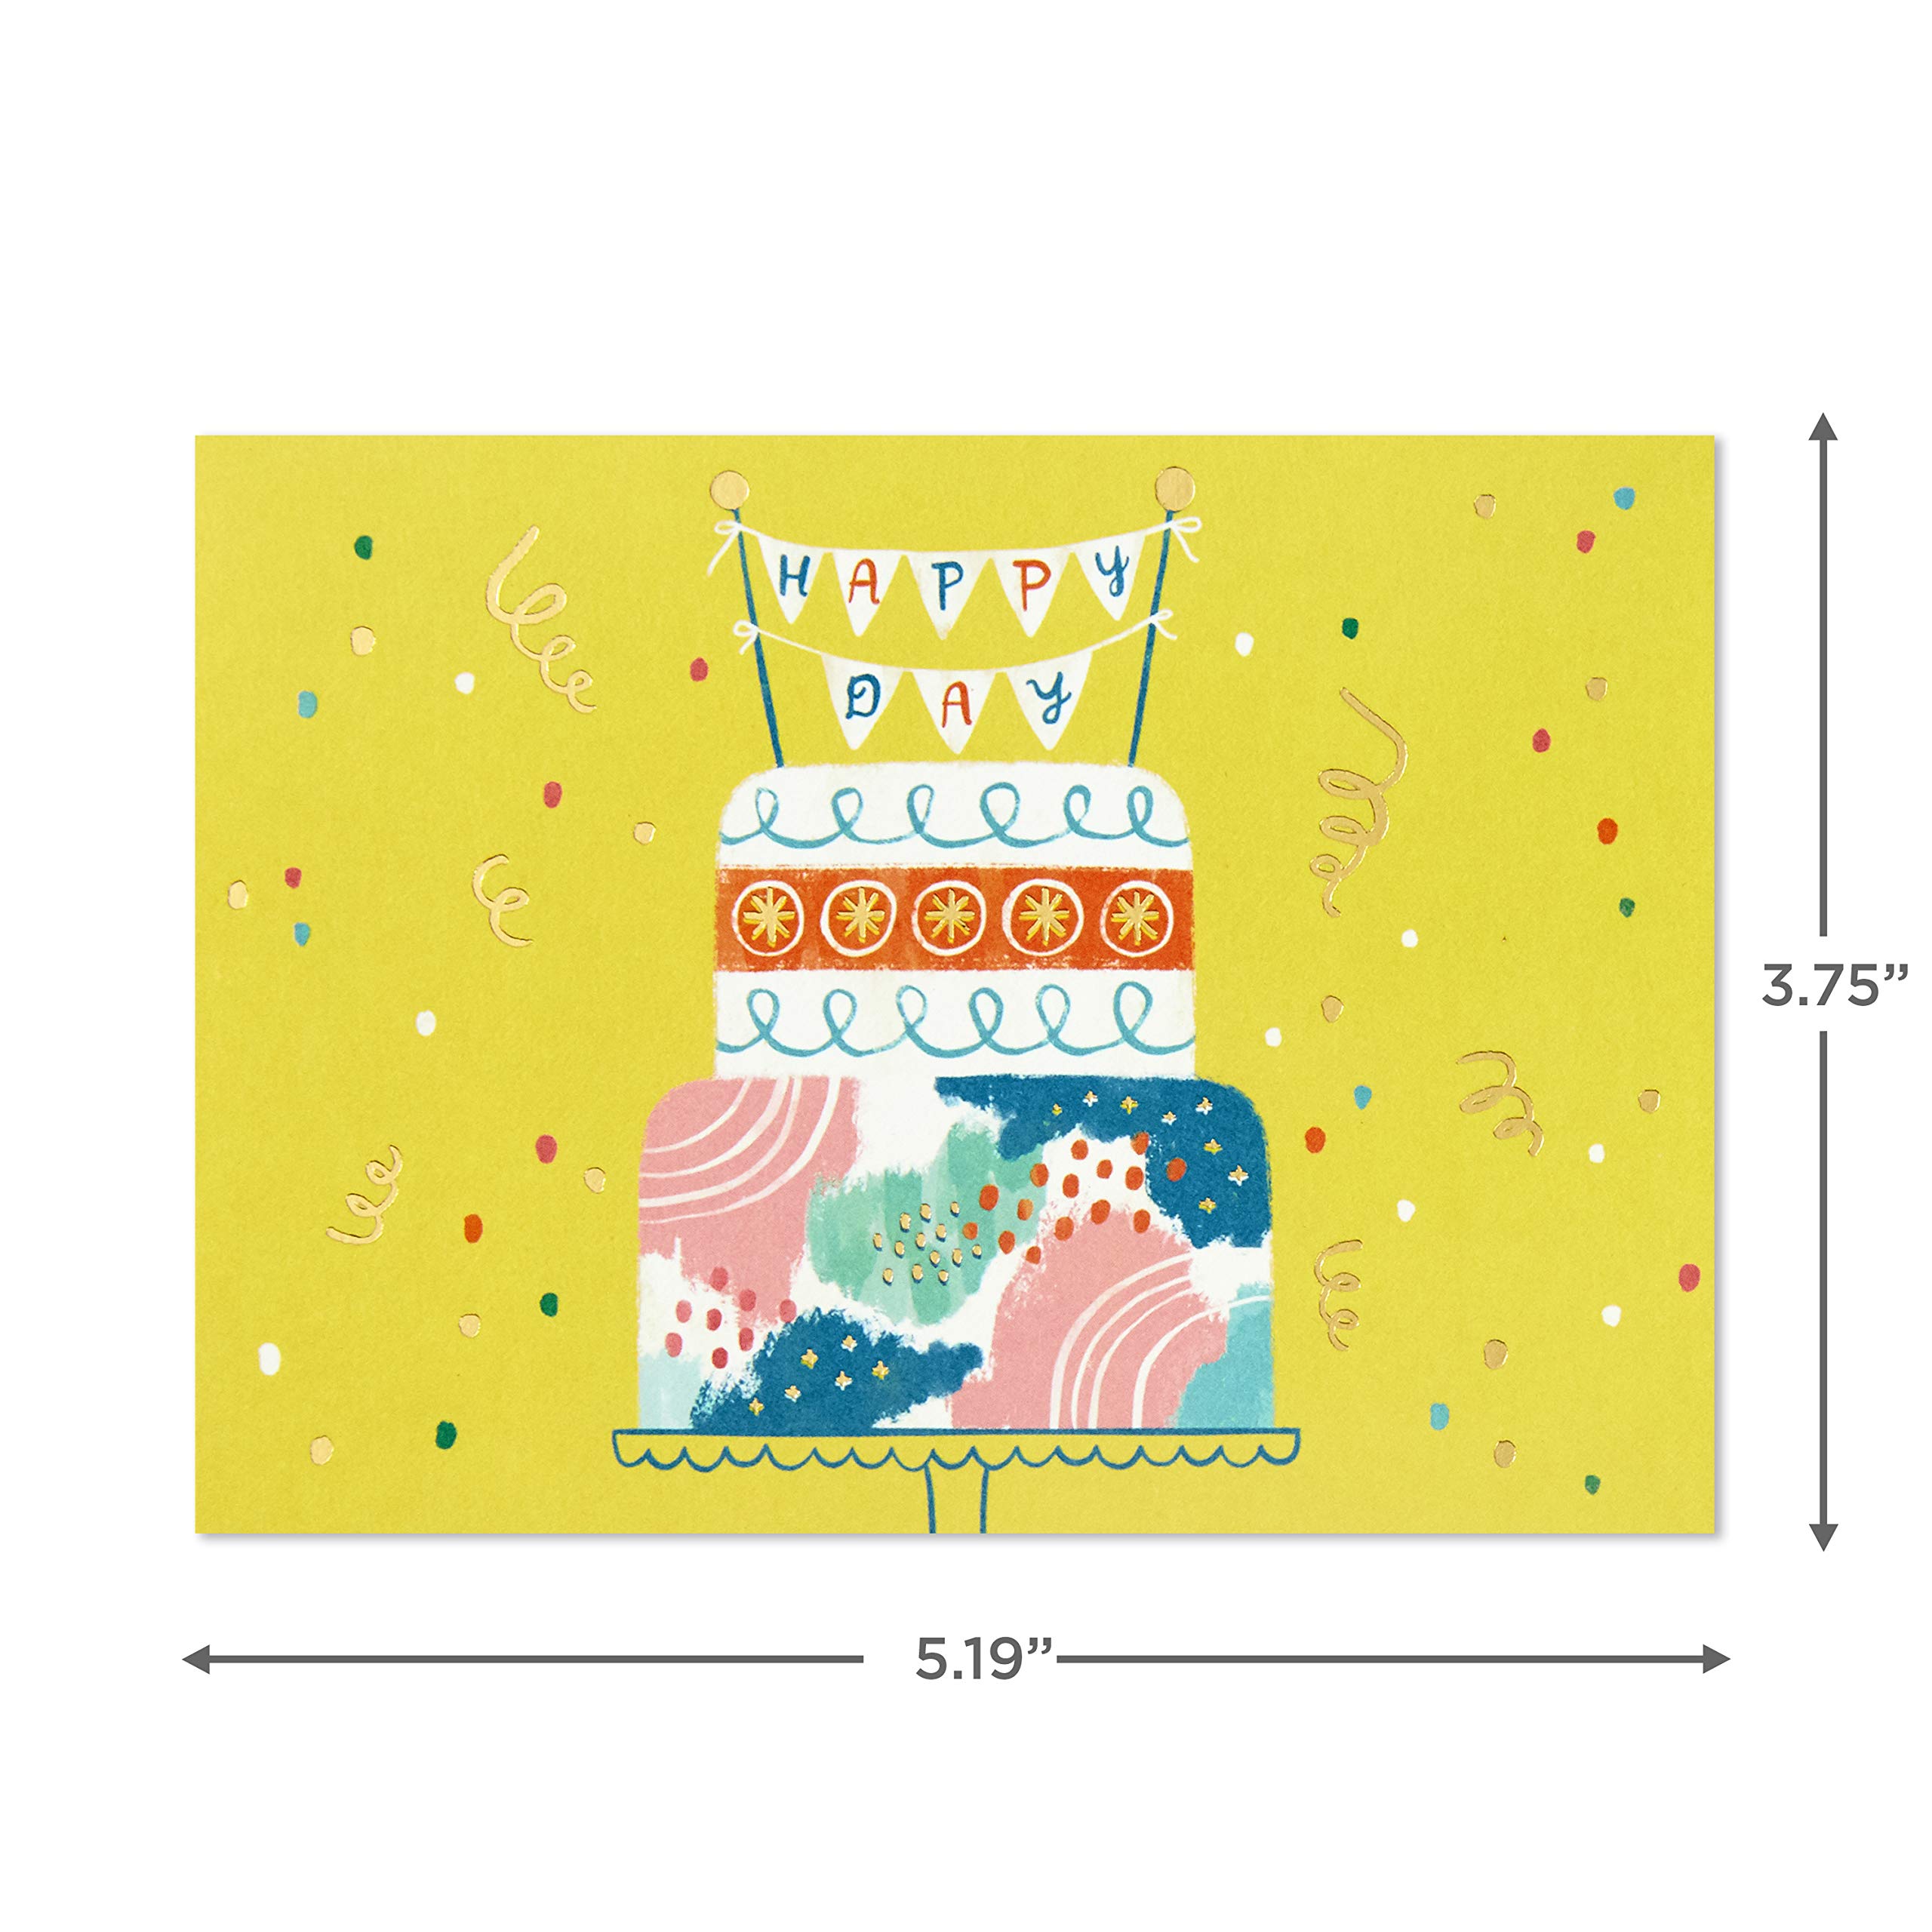 Hallmark Pack of 30 Assorted Boxed Greeting Cards, Good Vibes—Birthday Cards, Thinking of You Cards, Thank You Cards, Blank Cards (5STZ1034)